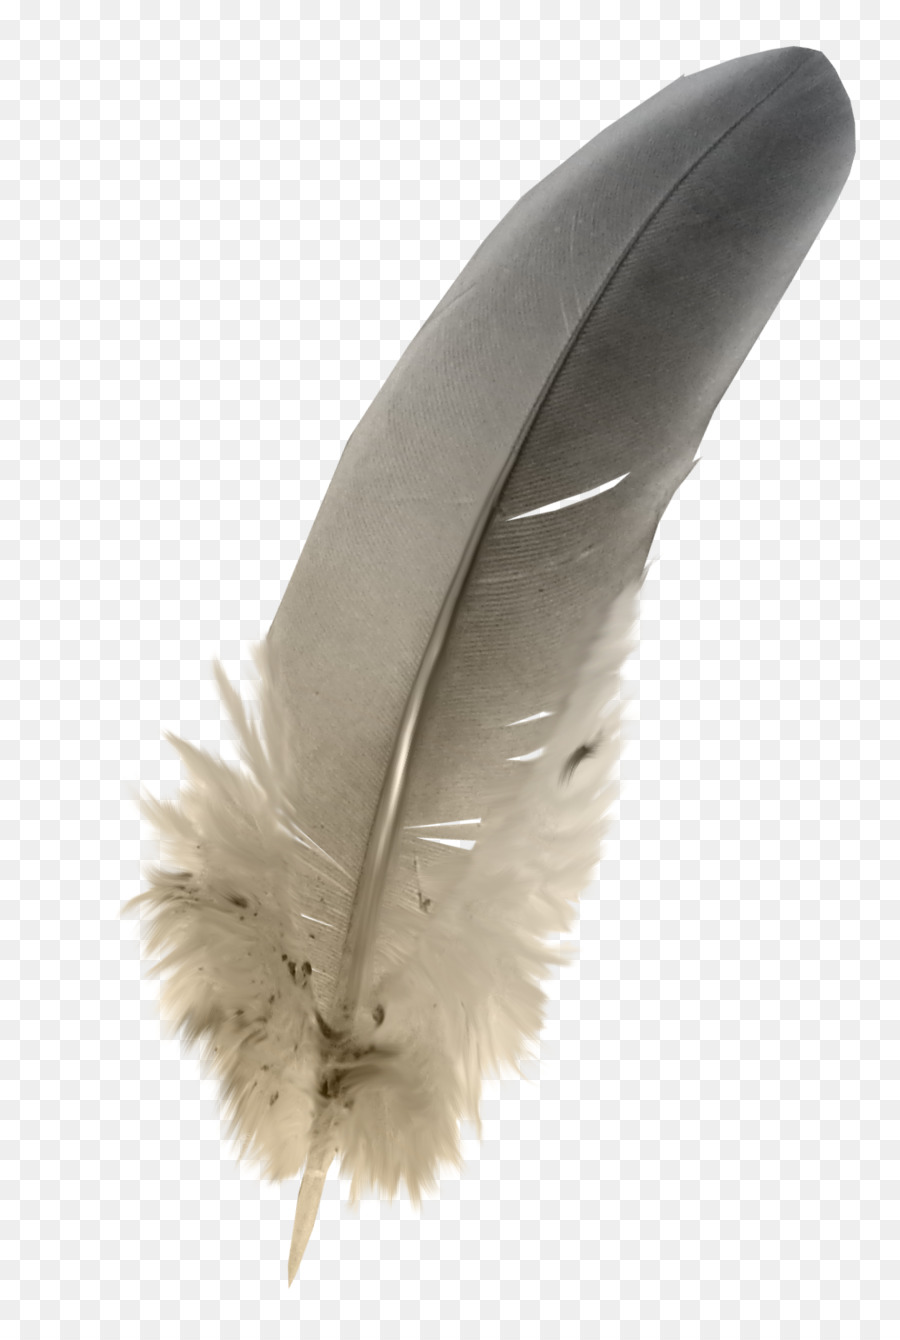 Feather Grey - Feathers png download - 1015*1503 - Free Transparent Feather png Download.